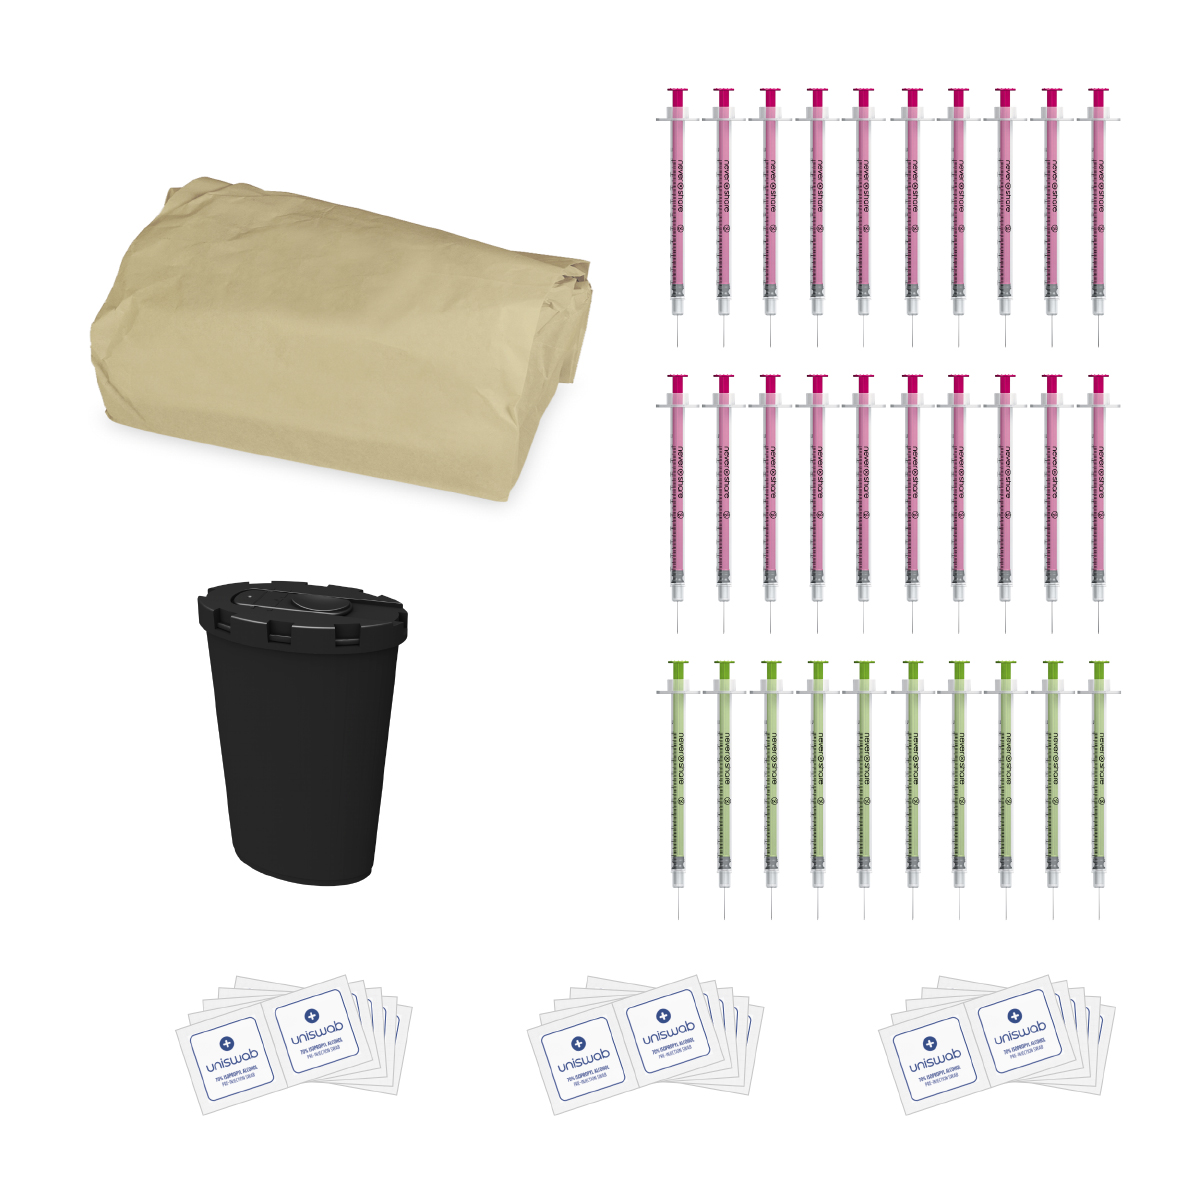 Nevershare 1ml: 30 Pack (includes a bin and swabs)